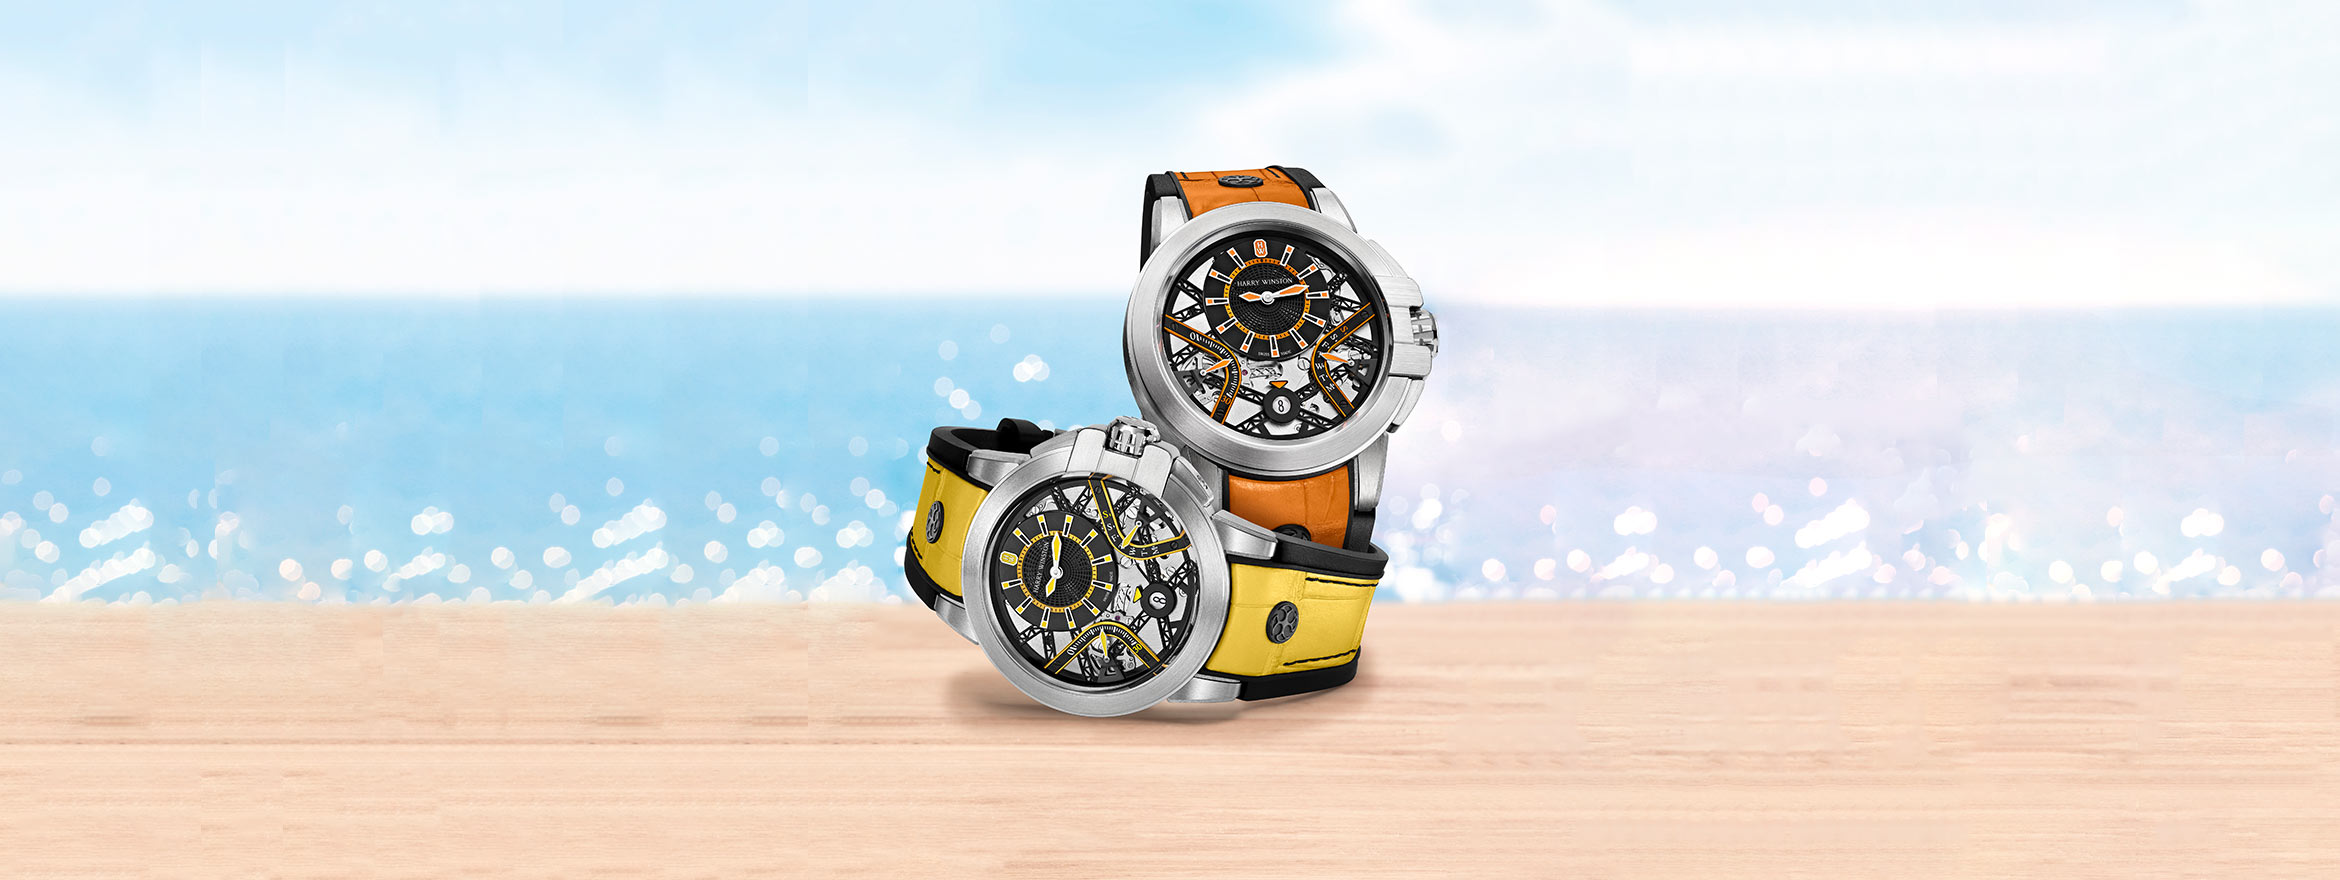 Three New Models Join Harry Winston Ocean Collection